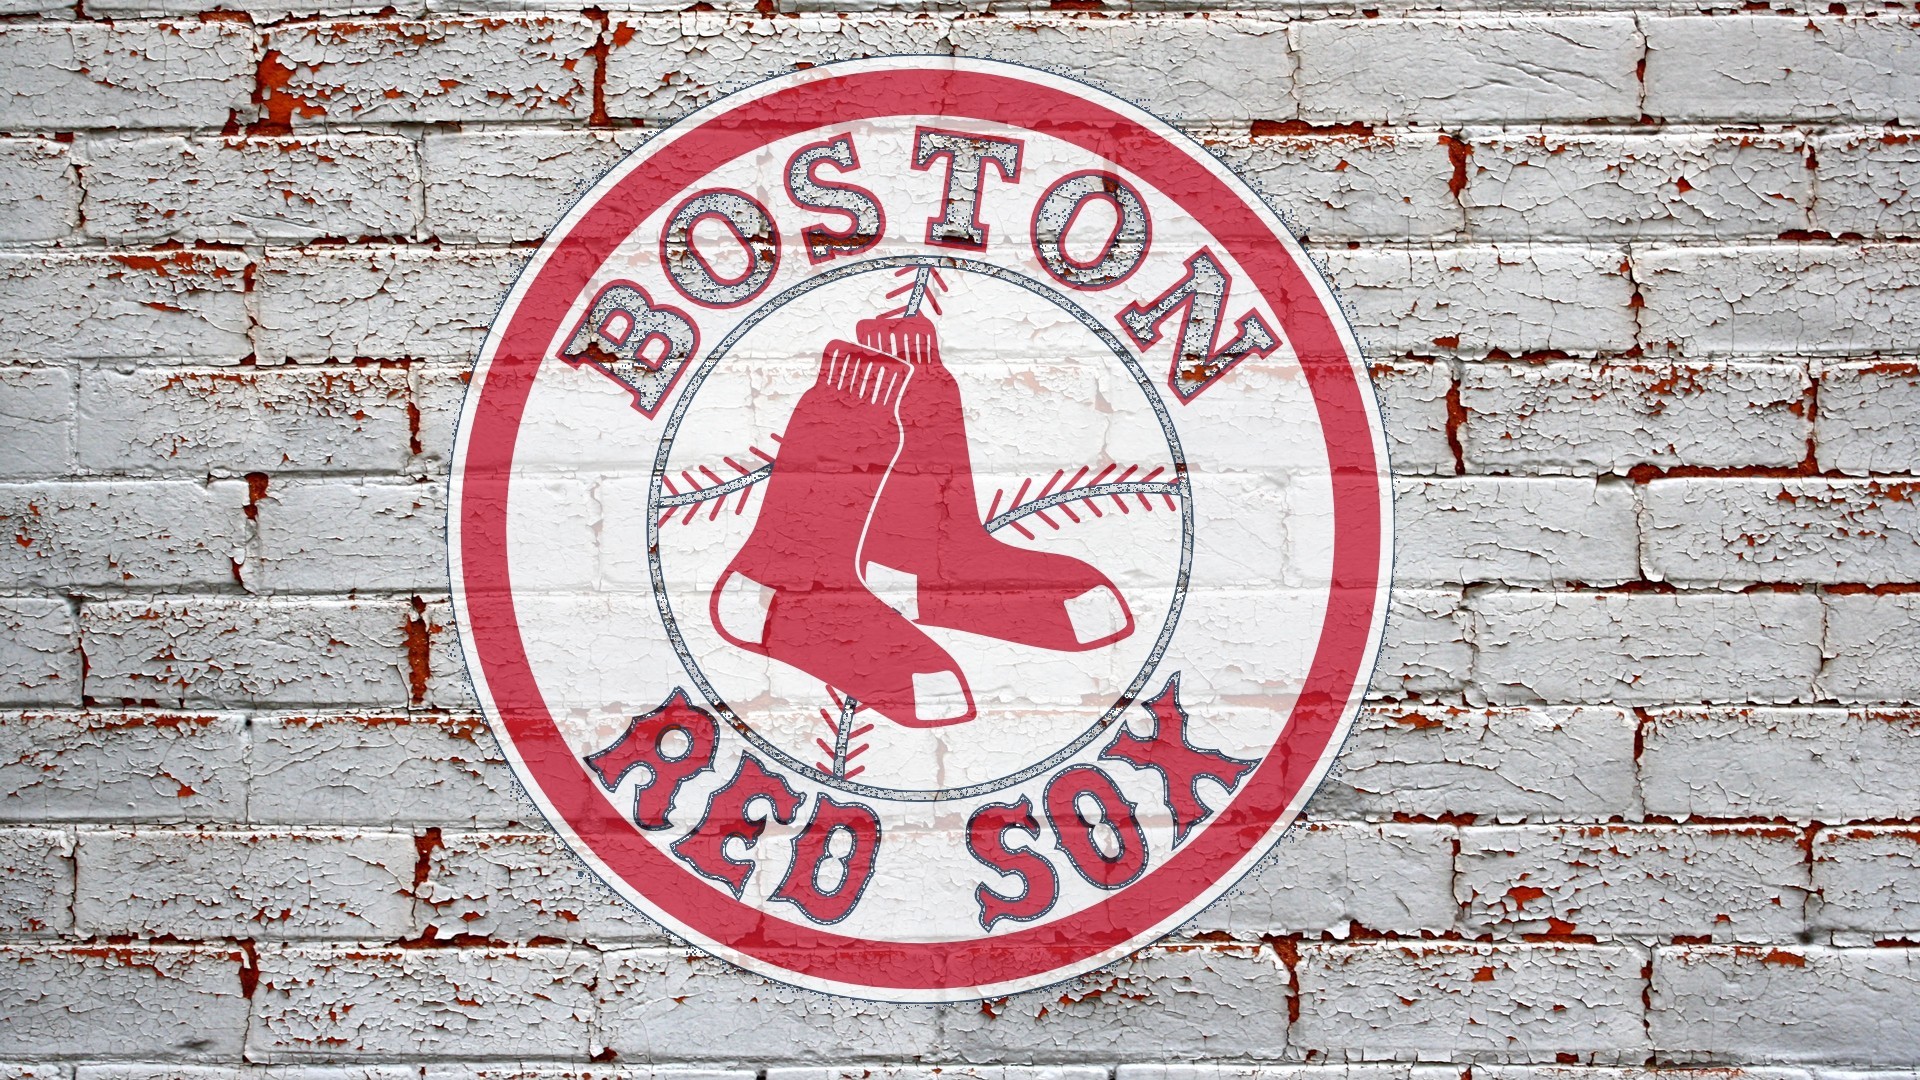 1920x1080 Boston Red Sox Wallpaper 36101 Images | Largepicts.com